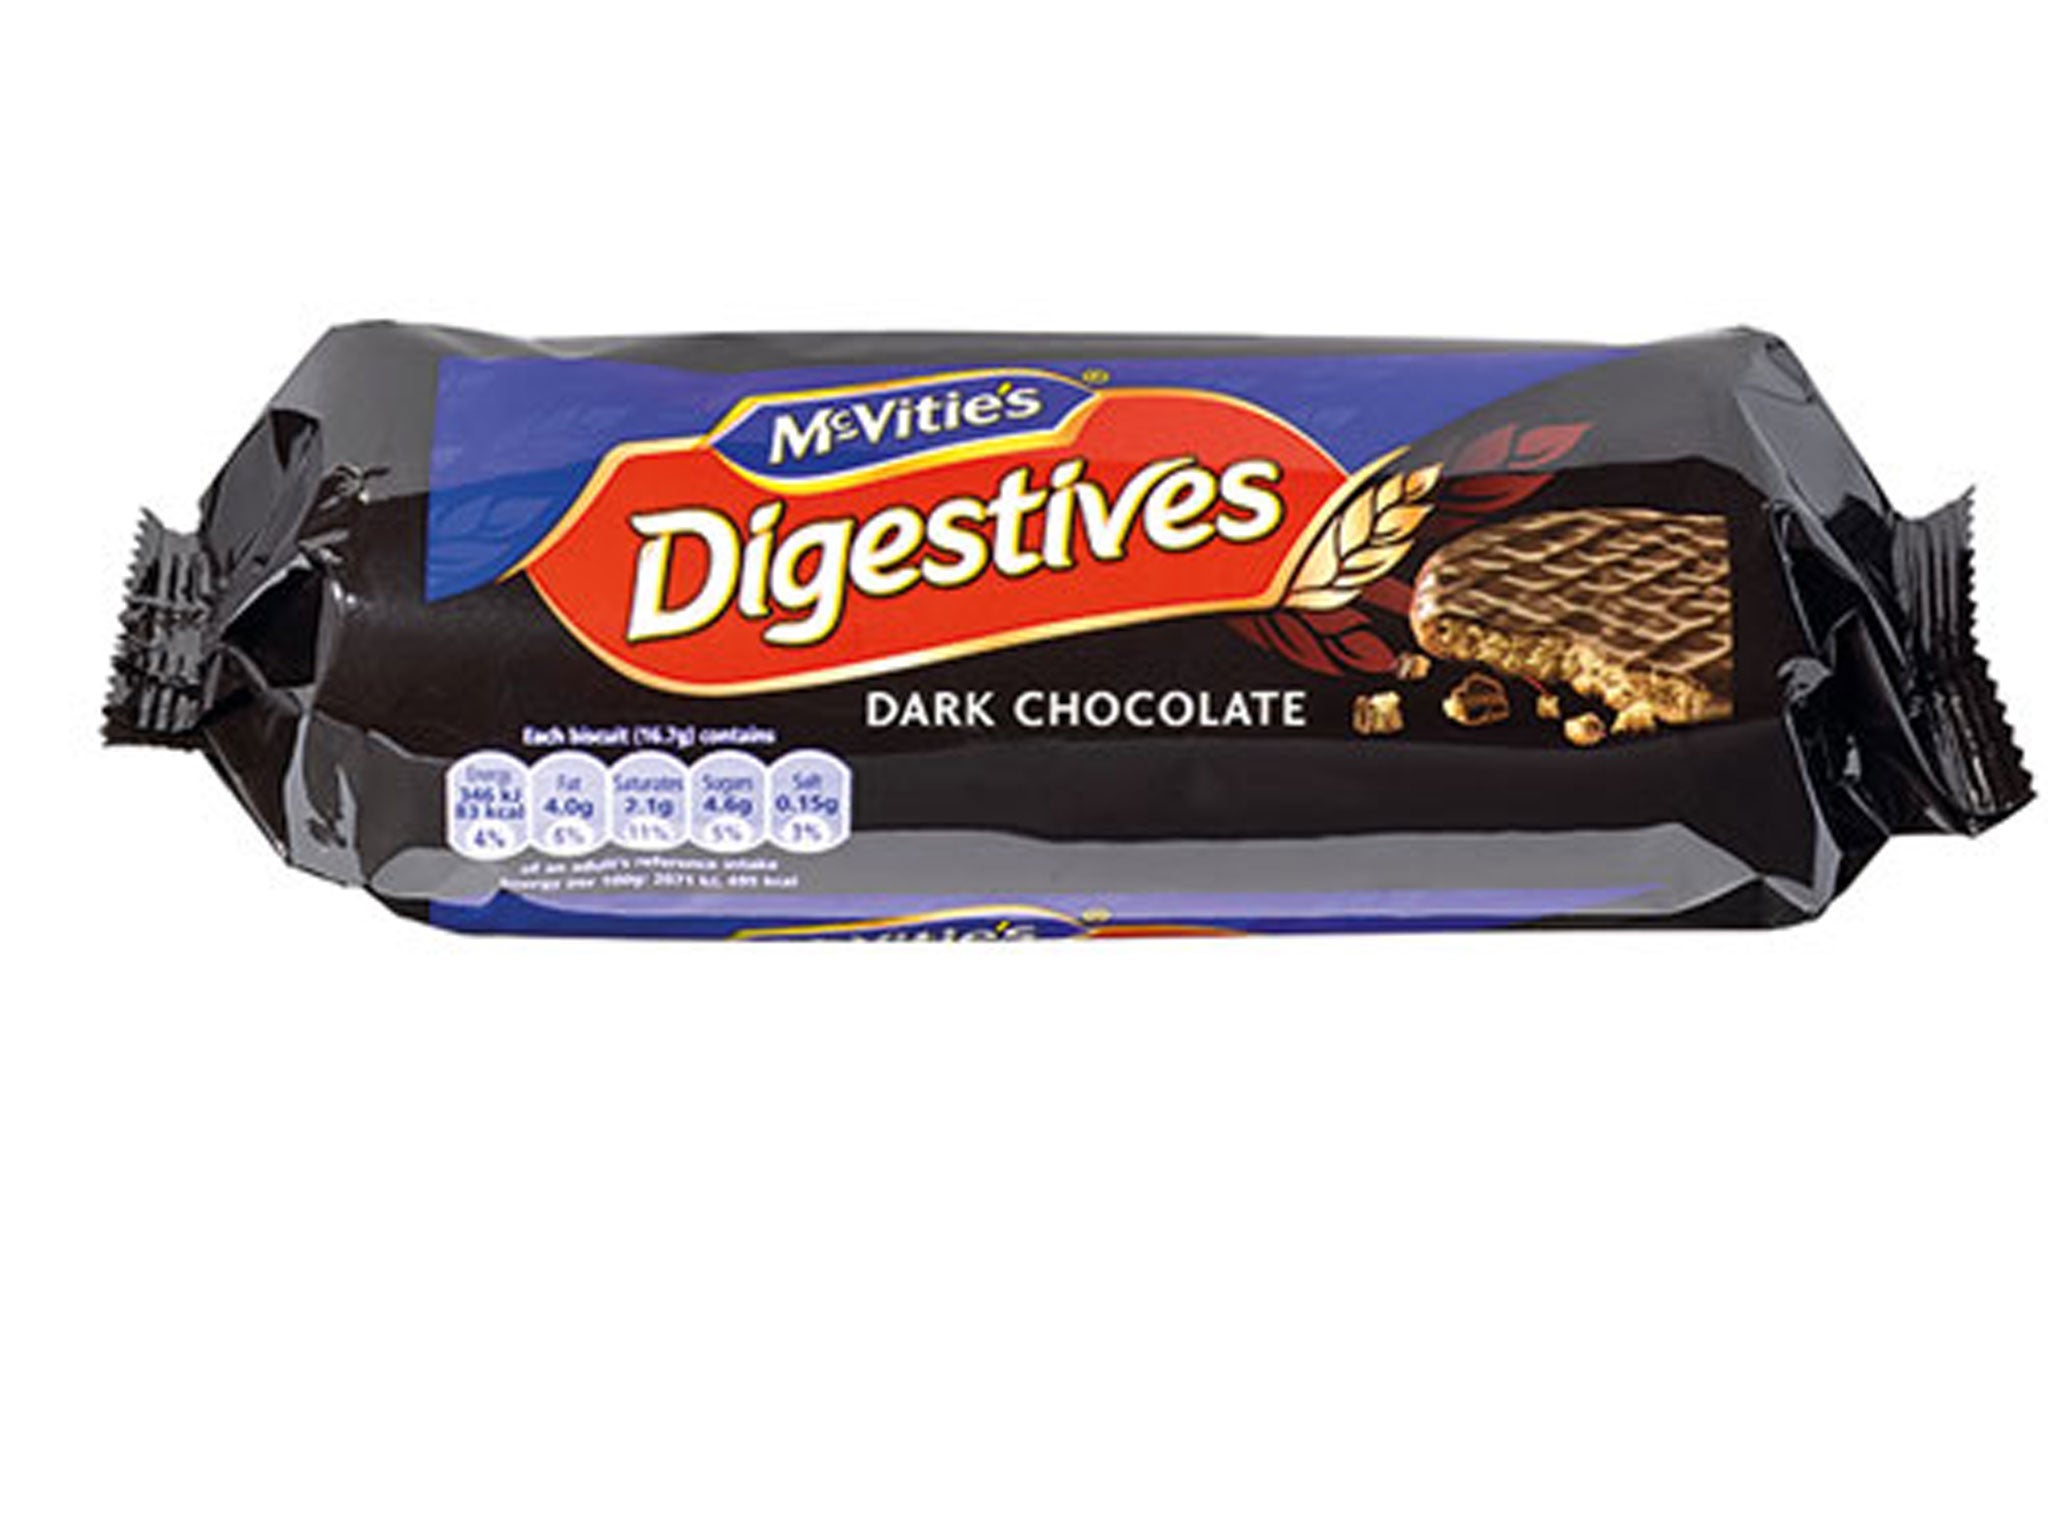 Yildiz is now embarking on a bold growth strategy - including expanding McVitie's products into new global markets and entering the UK's premium chocolate industry